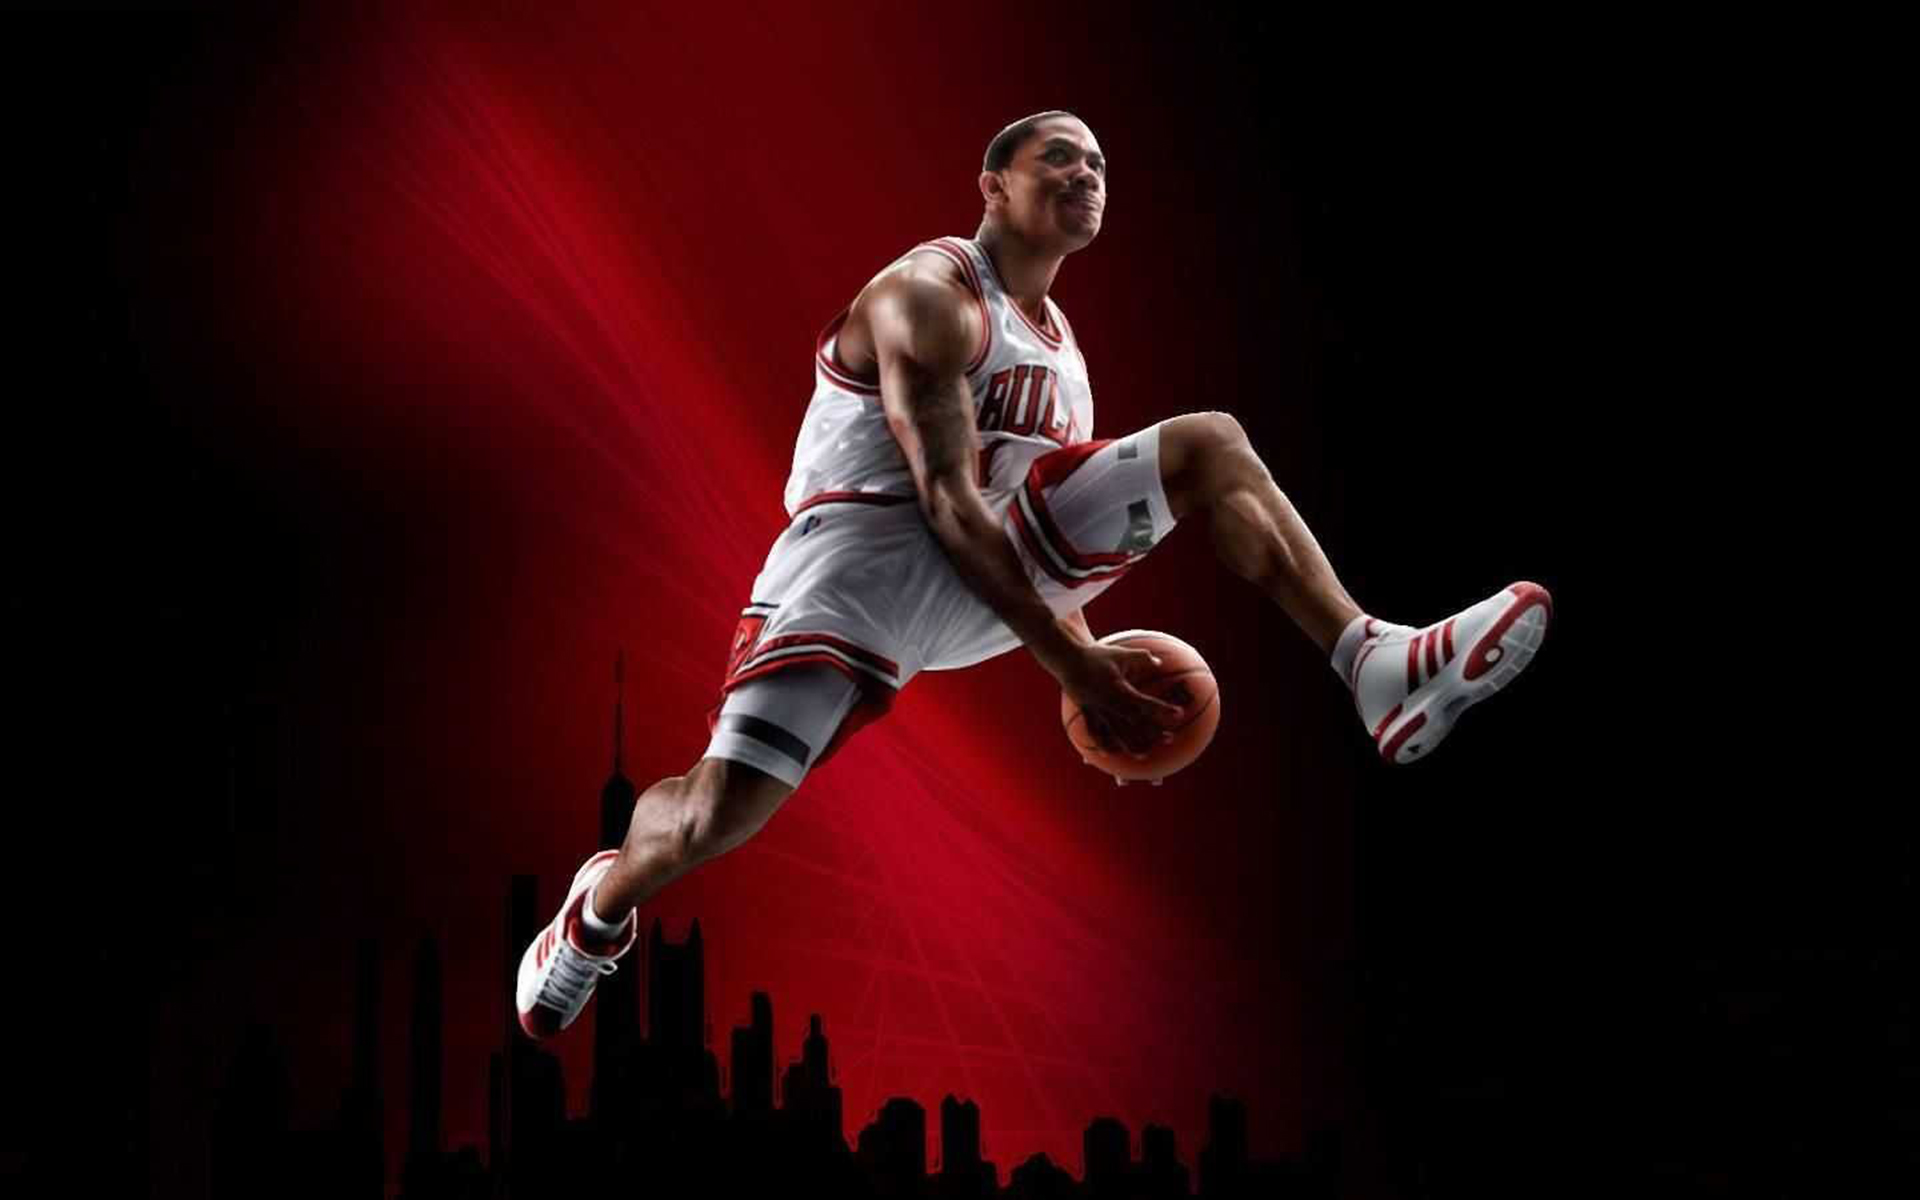 Discover 64+ red basketball wallpapers super hot - in.cdgdbentre